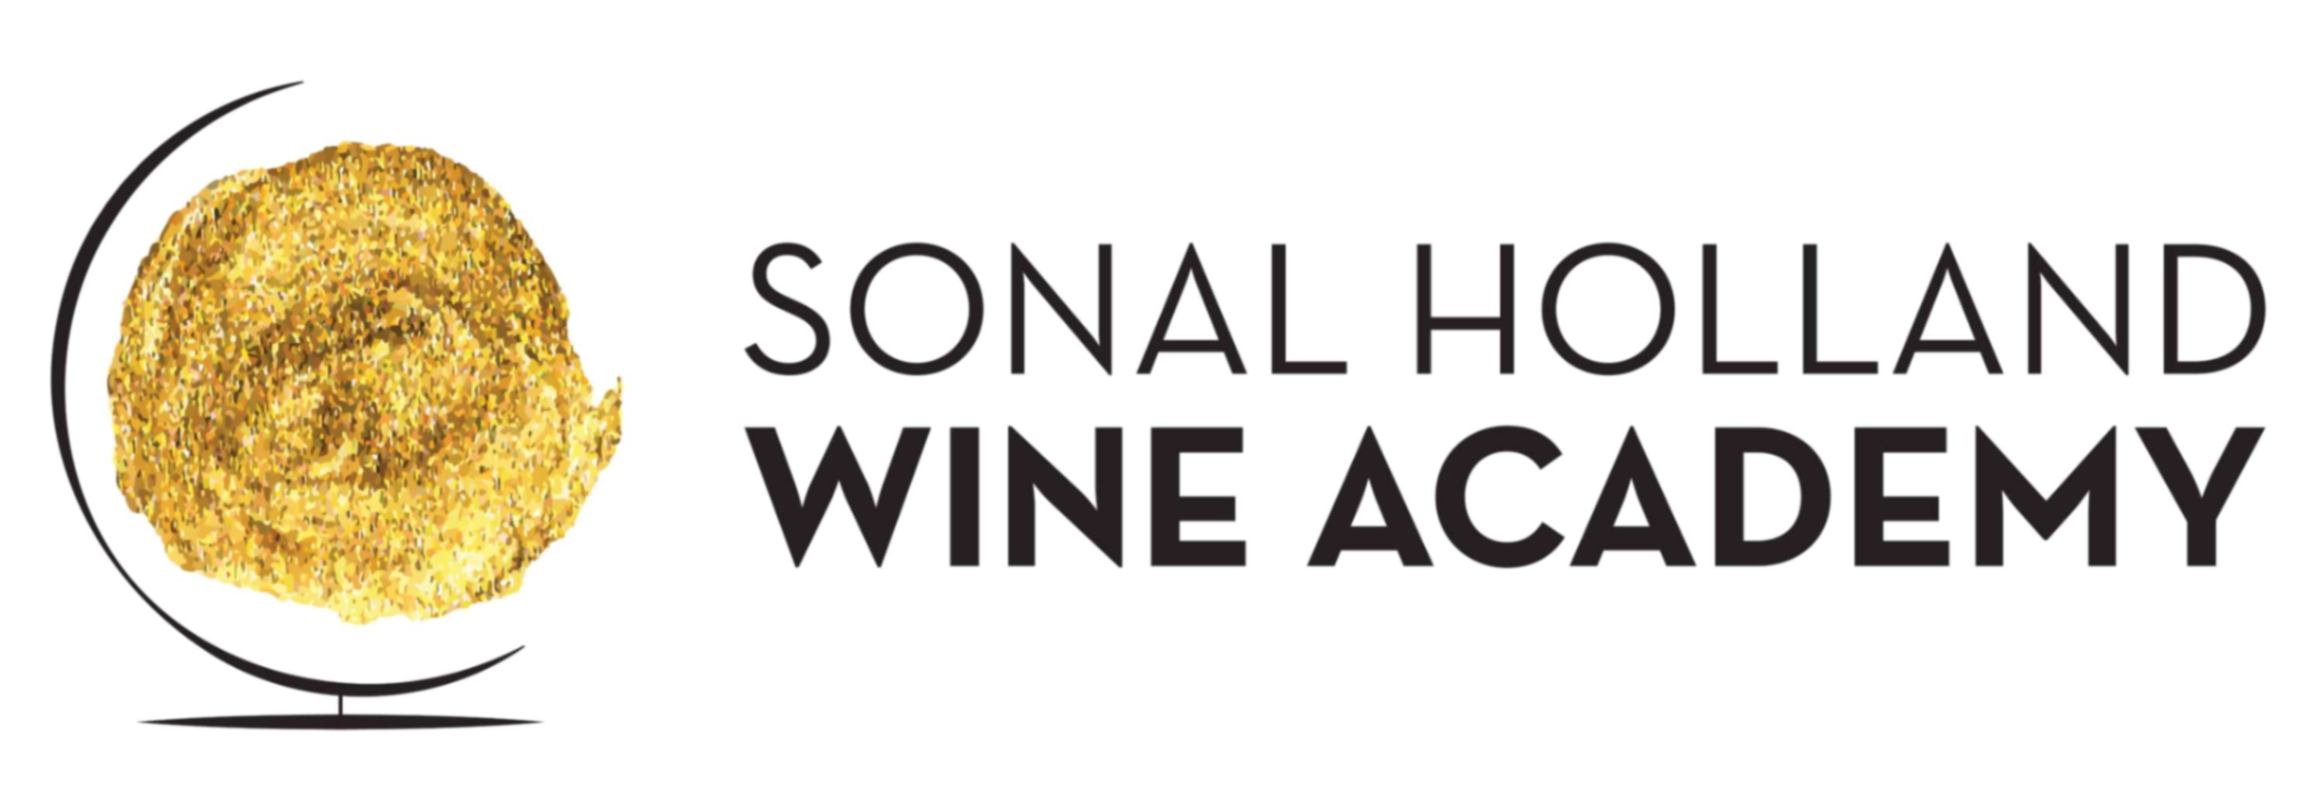 Online Wine Courses | Sonal Holland Wine Academy | Learn, Grow, Suceed